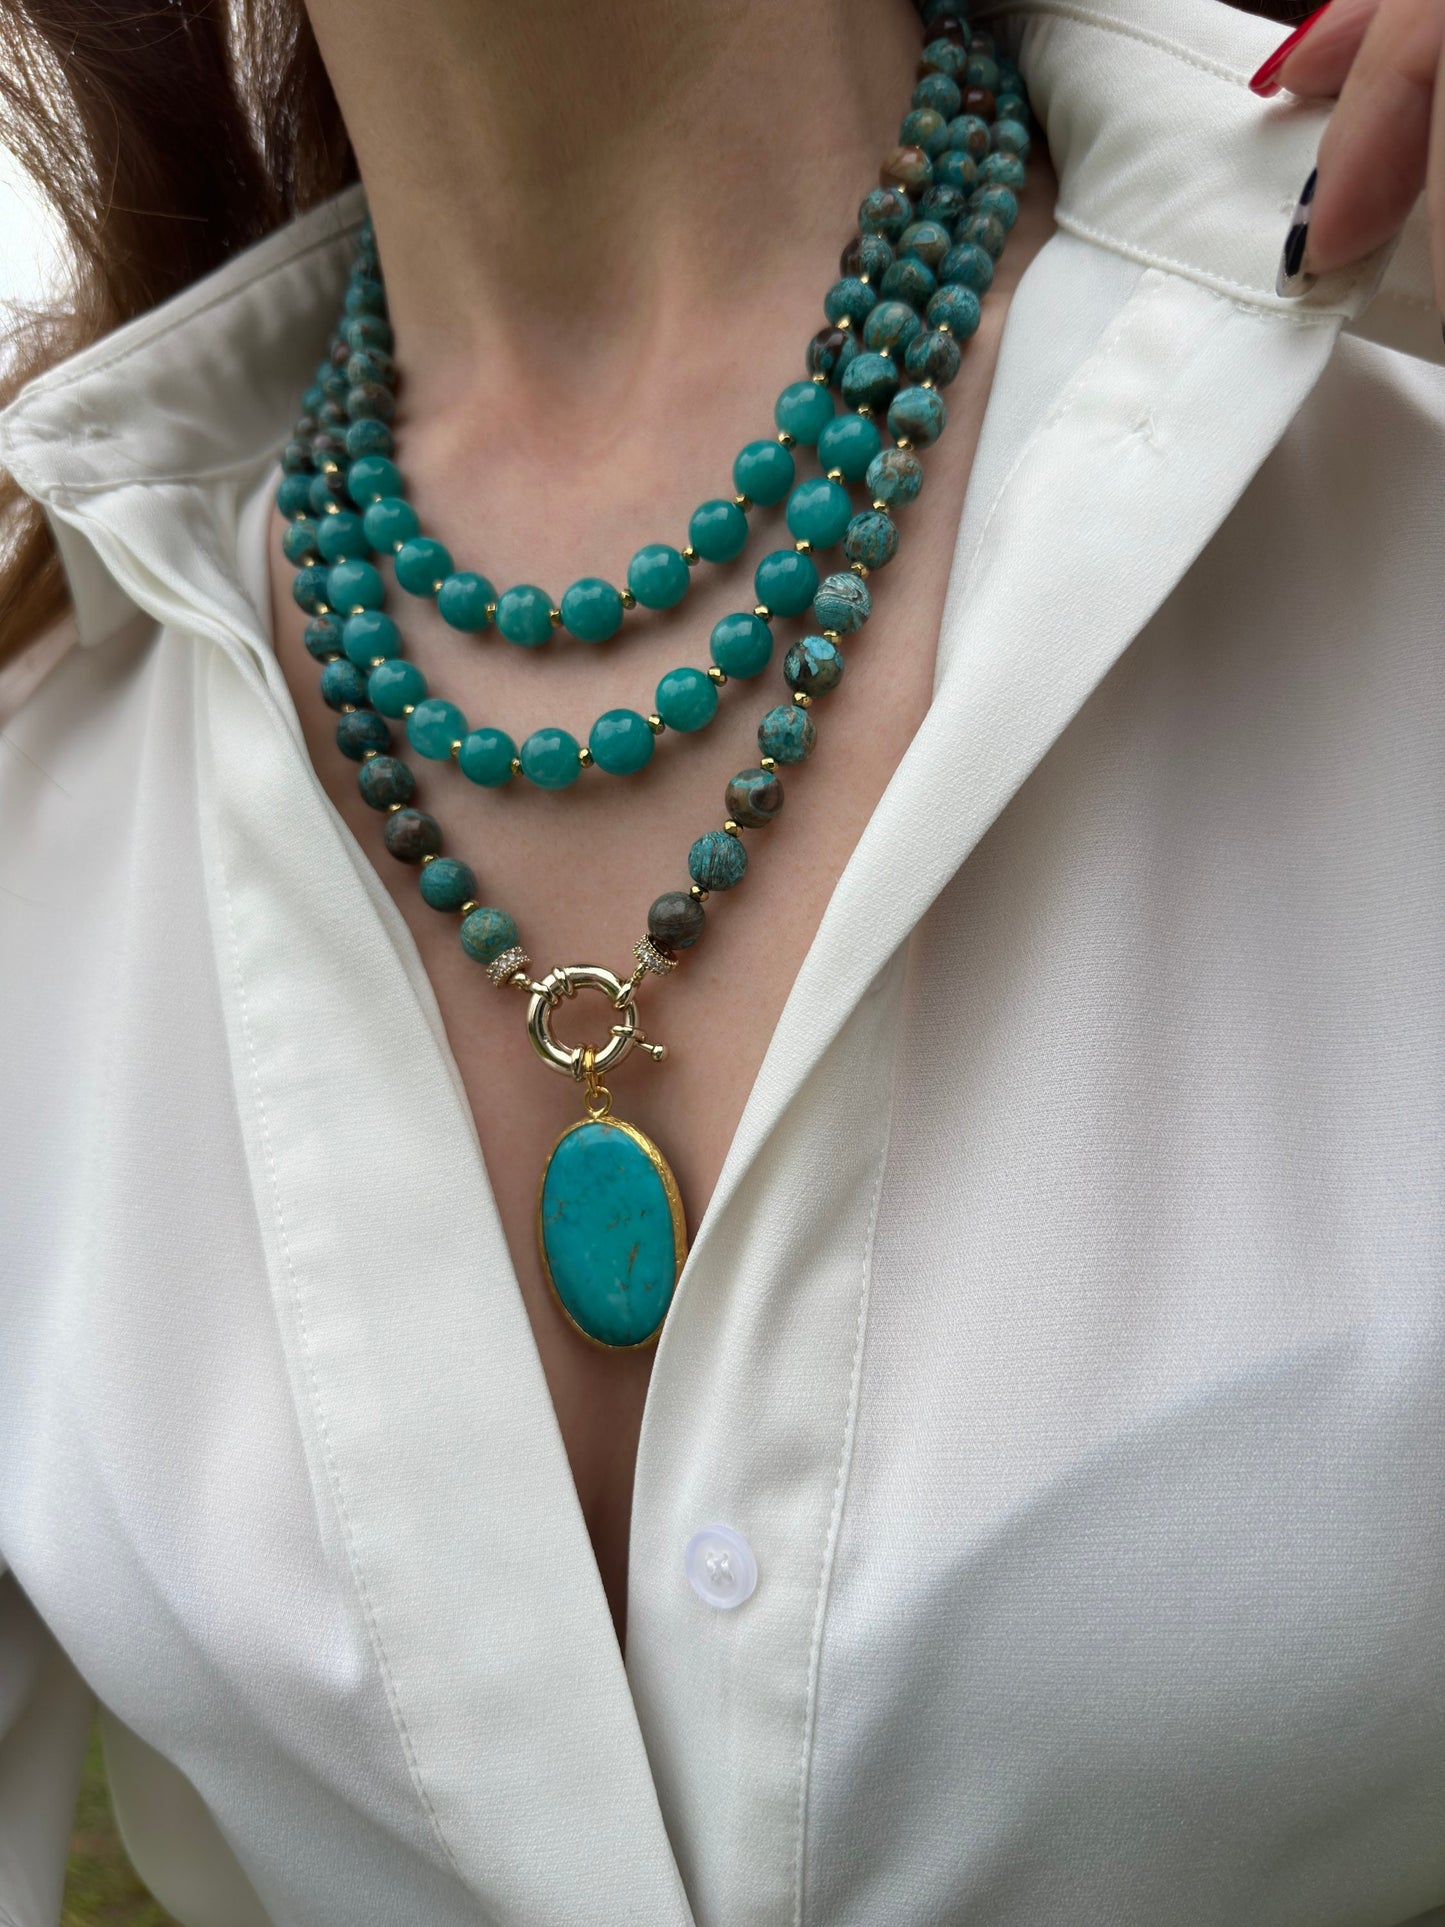 Amazonite and Jasper Necklace, Multistrand Blue Green Gemstones, Handmade Layered Jewelry for Mothers Day Gift, Big Bold Statement Necklace